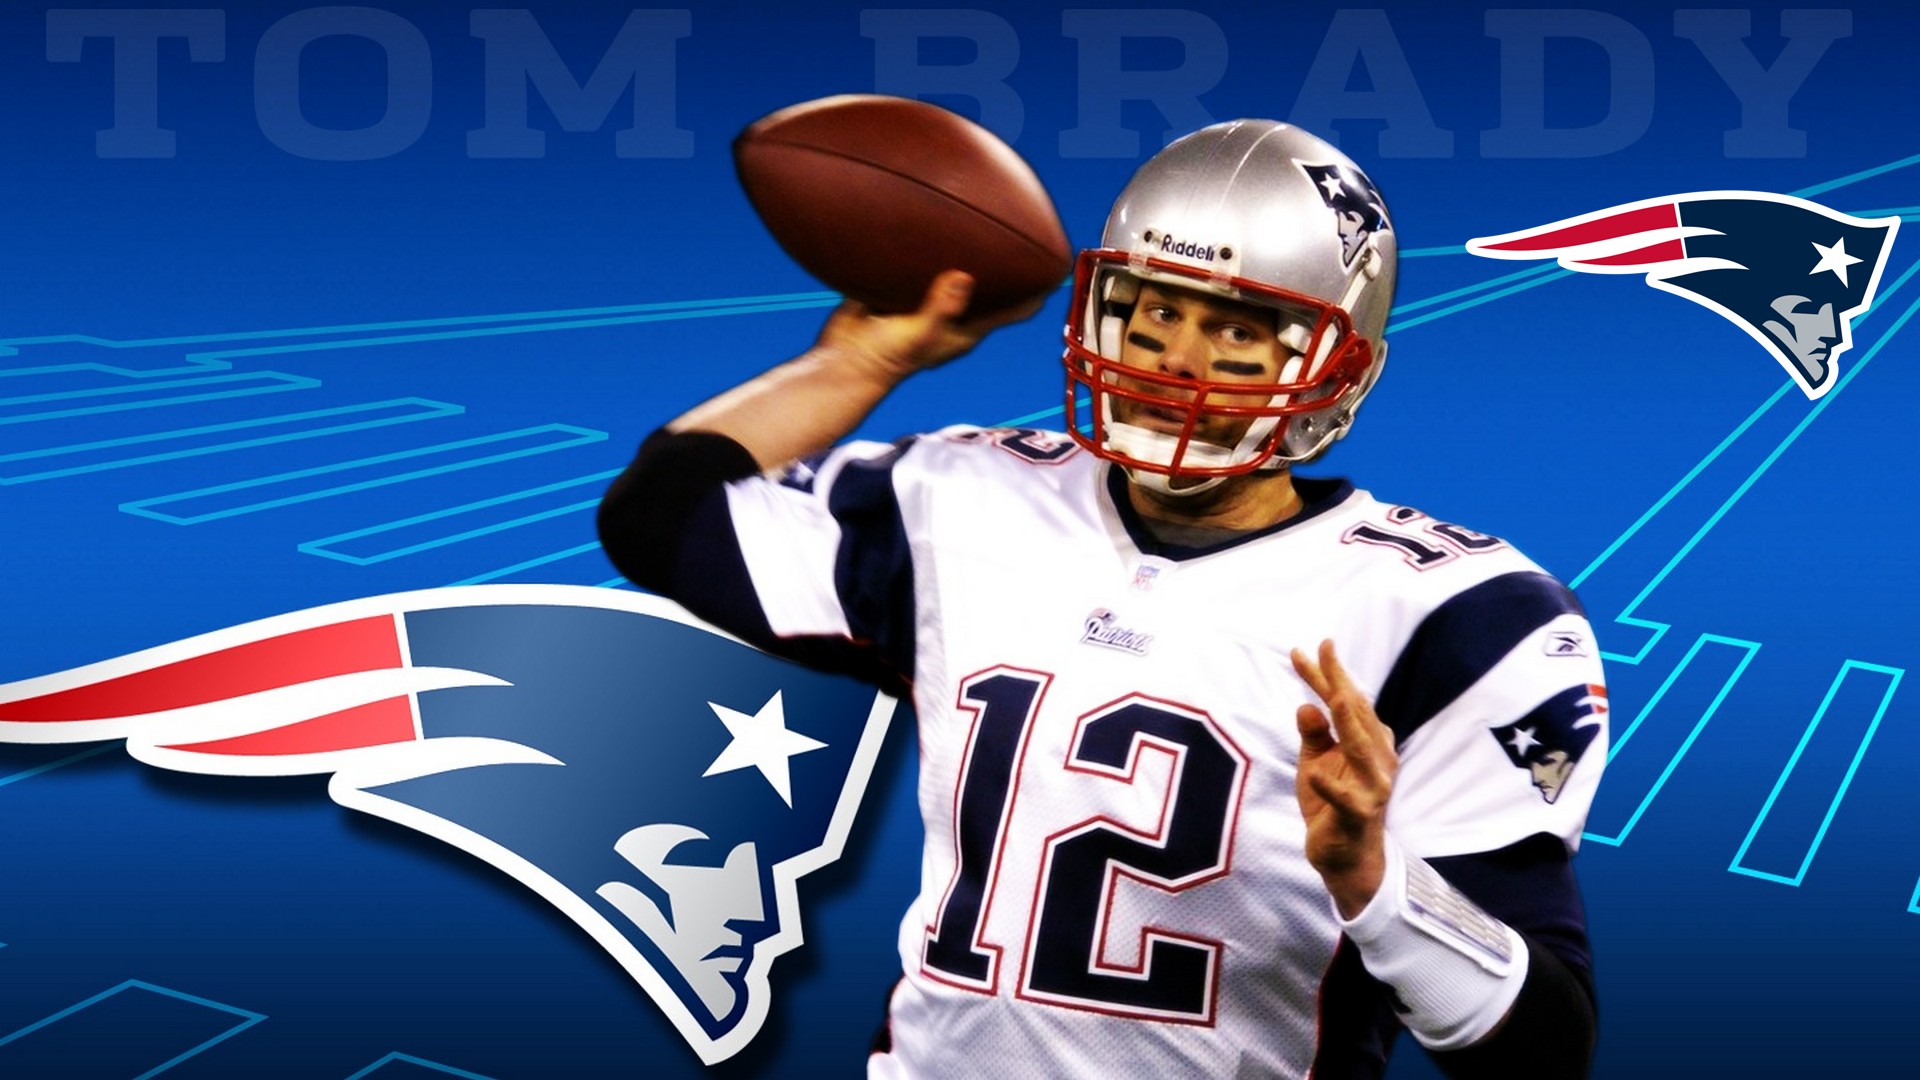 Tom Brady Super Bowl Desktop Wallpapers with resolution 1920x1080 pixel. You can make this wallpaper for your Mac or Windows Desktop Background, iPhone, Android or Tablet and another Smartphone device